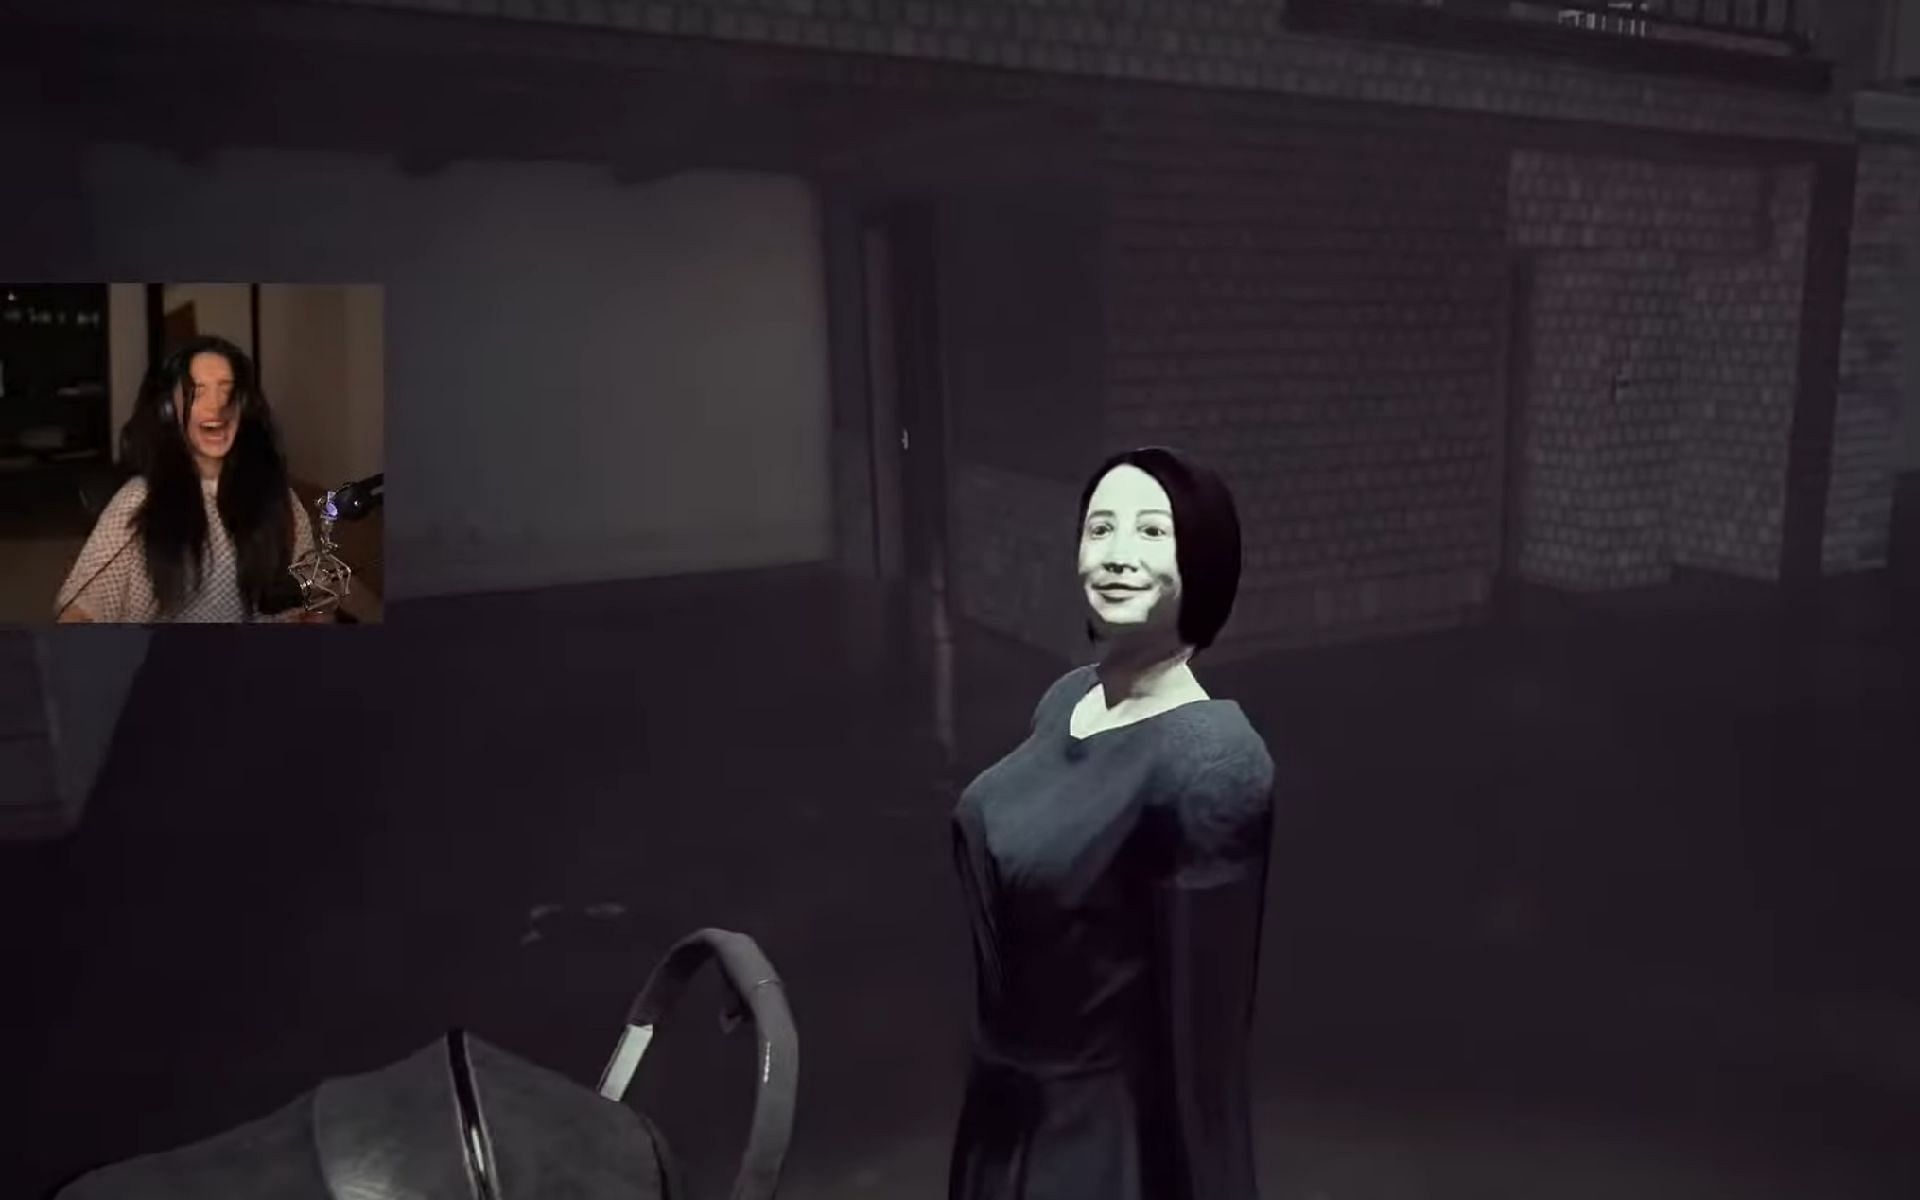 Valkyrae gets scared by a female NPC and falls off her chair (Image via Valkyrae/YouTube)